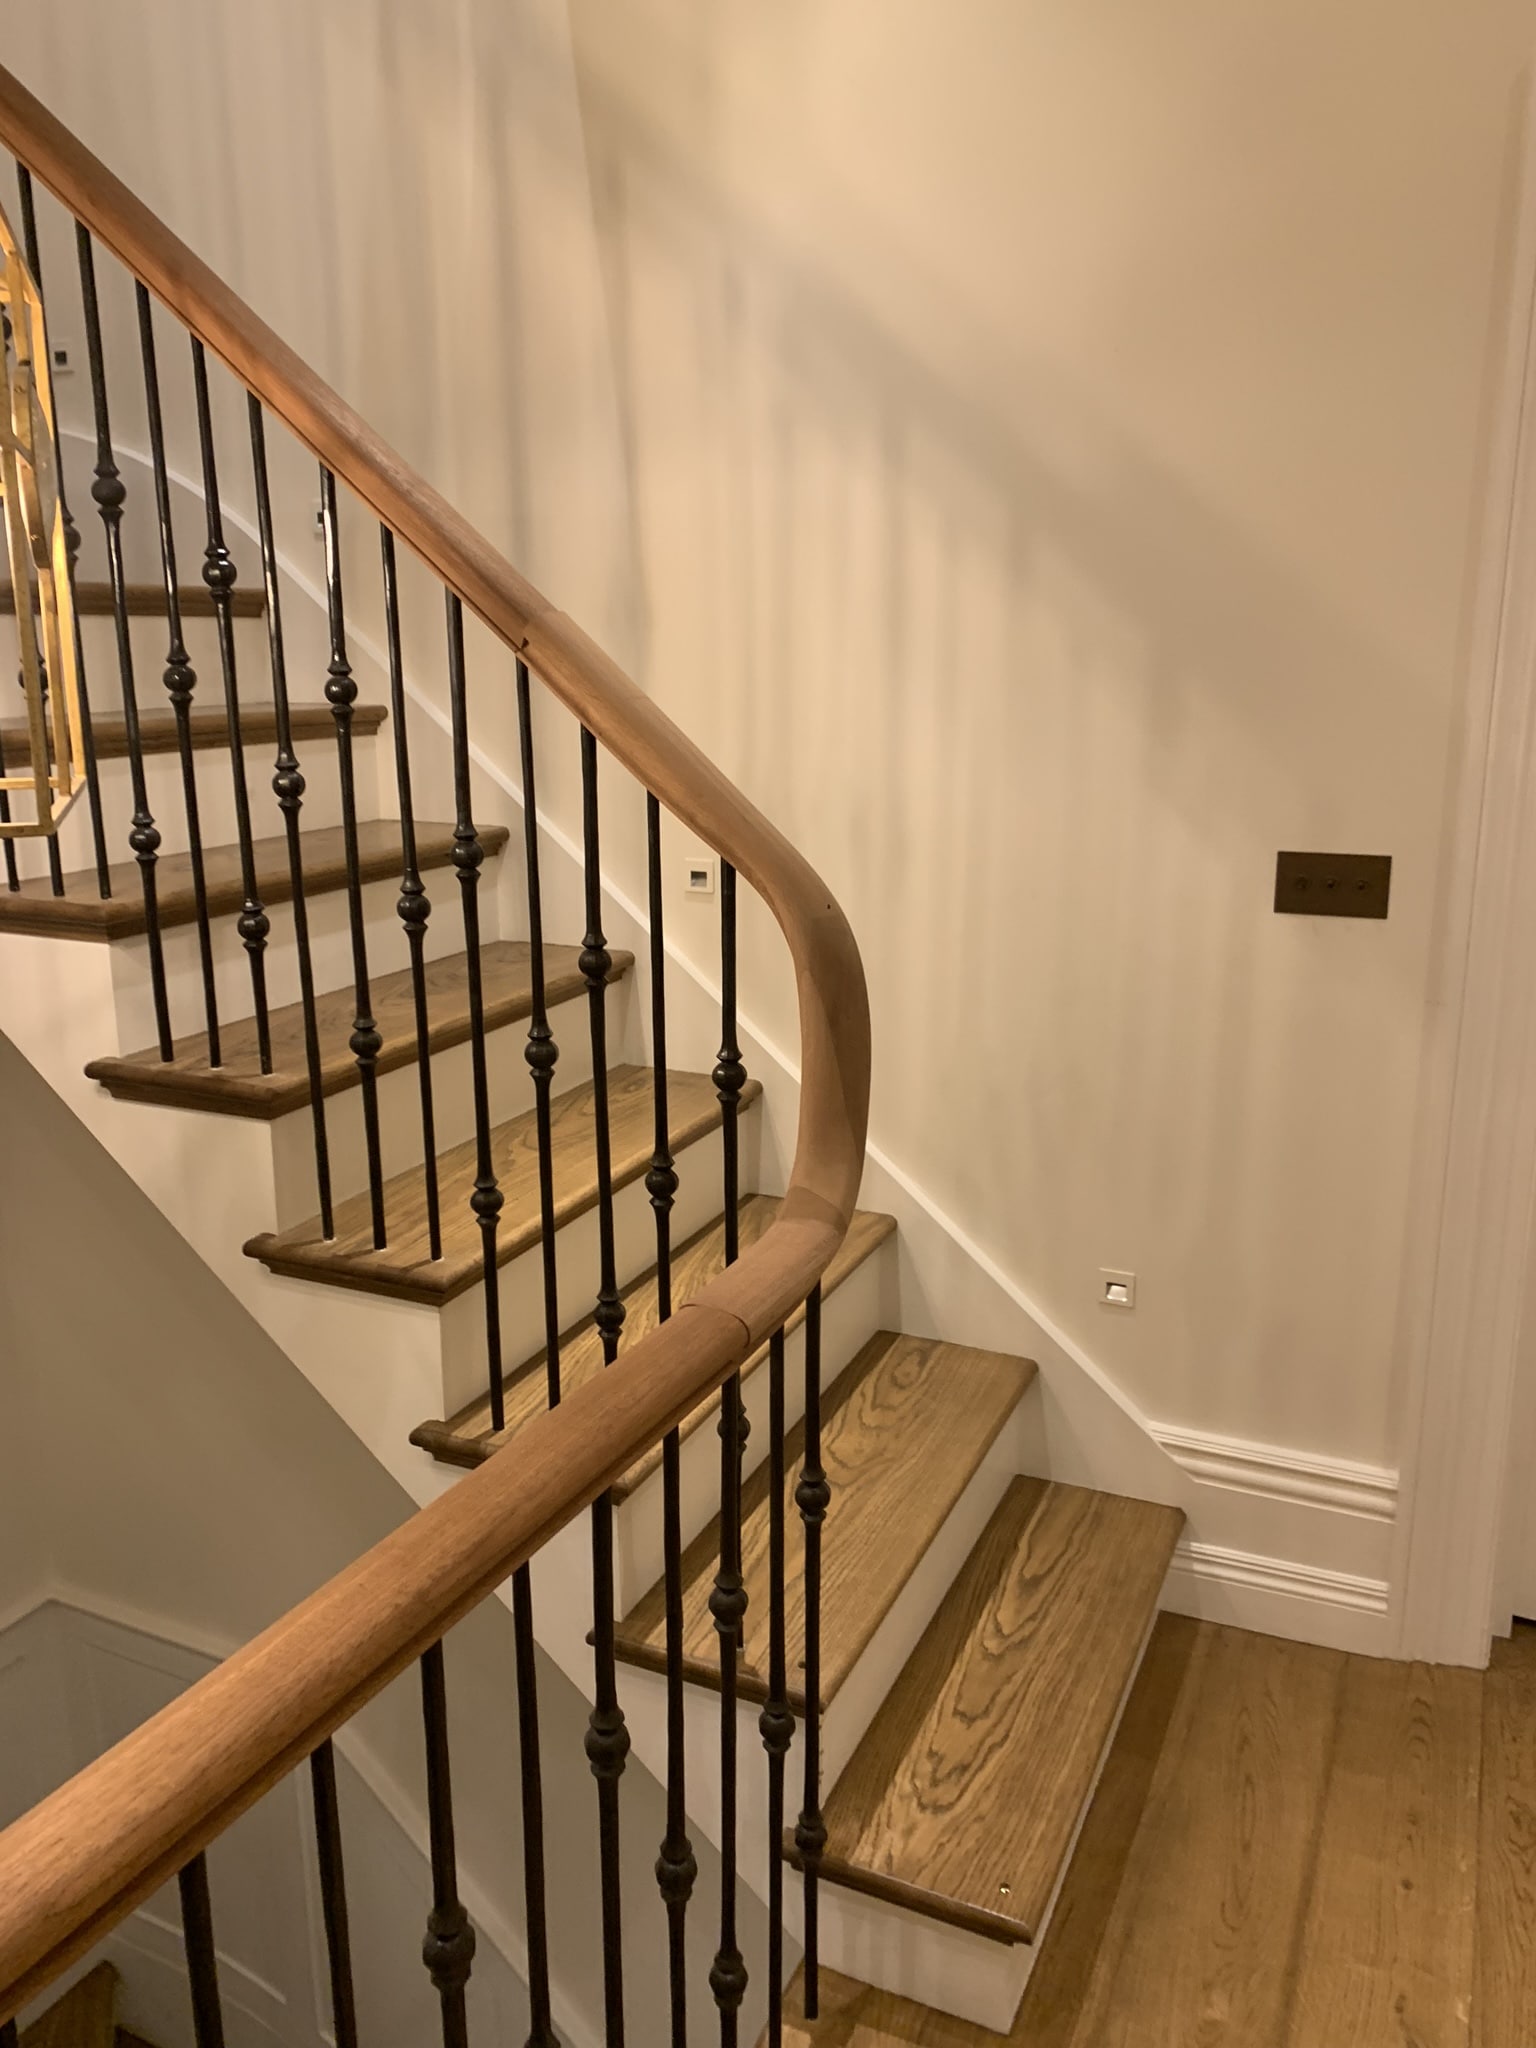 Special design of curved handrail. Hardwood.